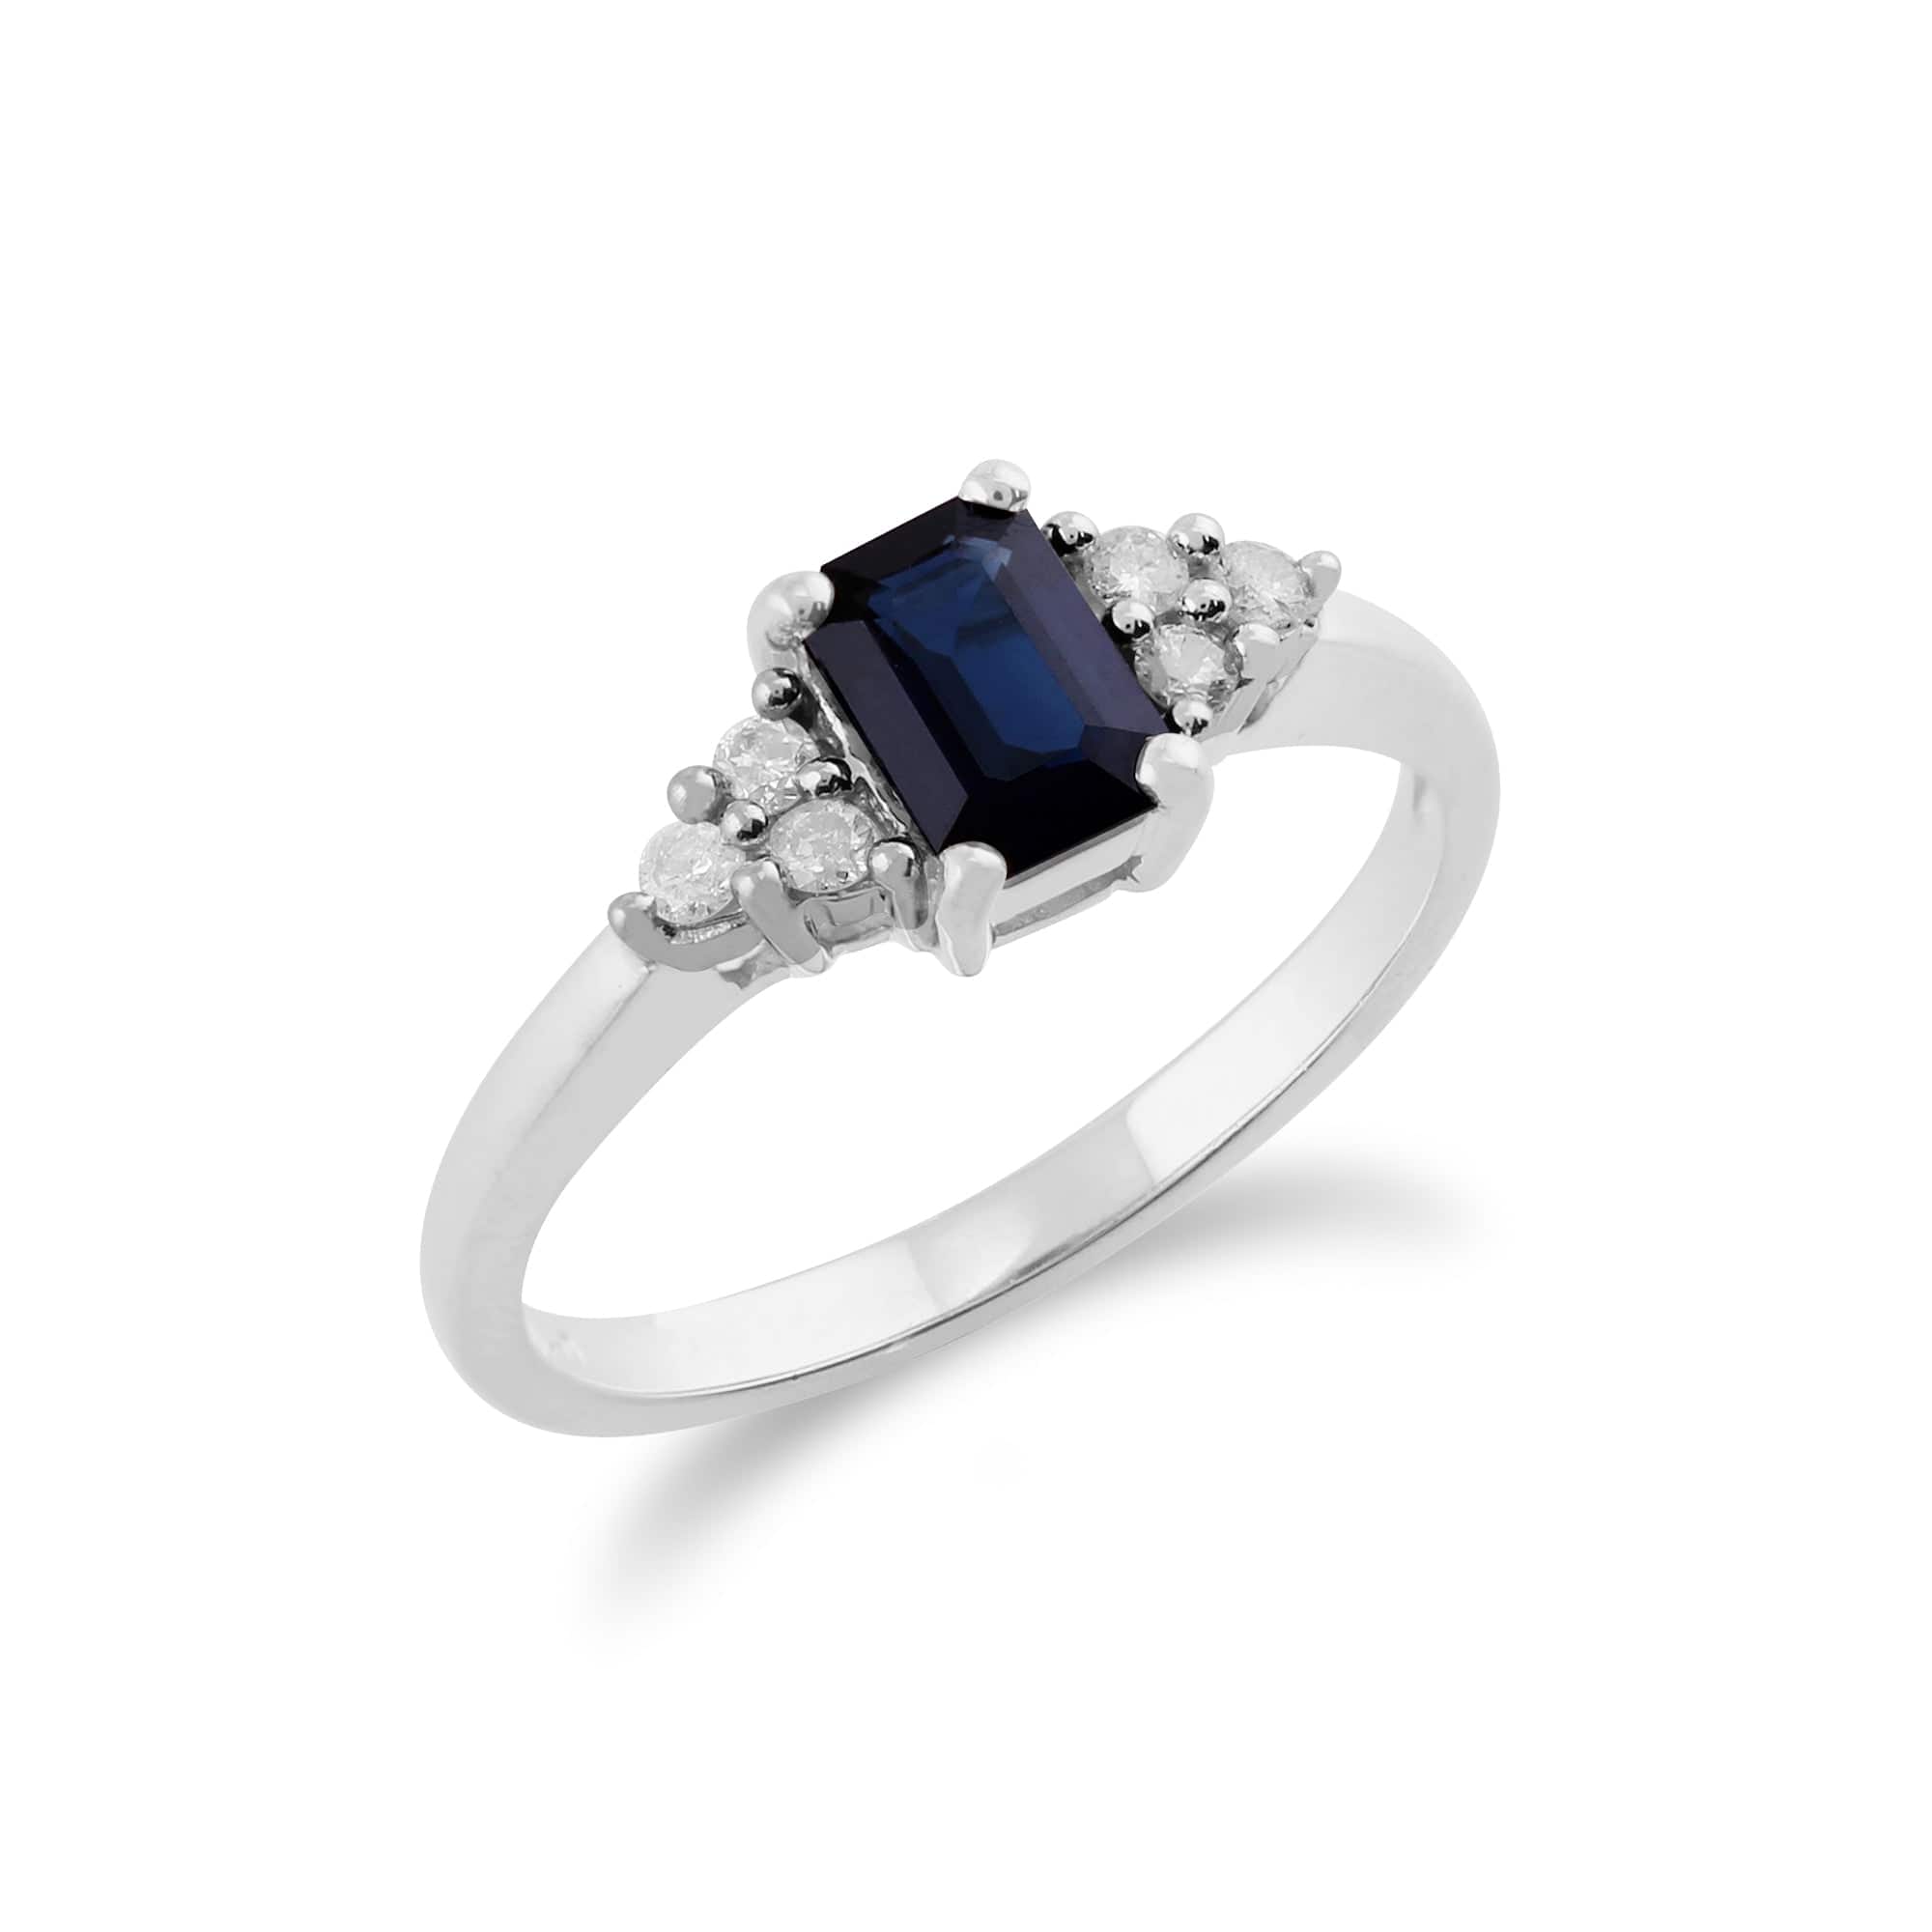 117R0018039 Classic Octagon Sapphire & Diamond Ring in 9ct White Gold 2